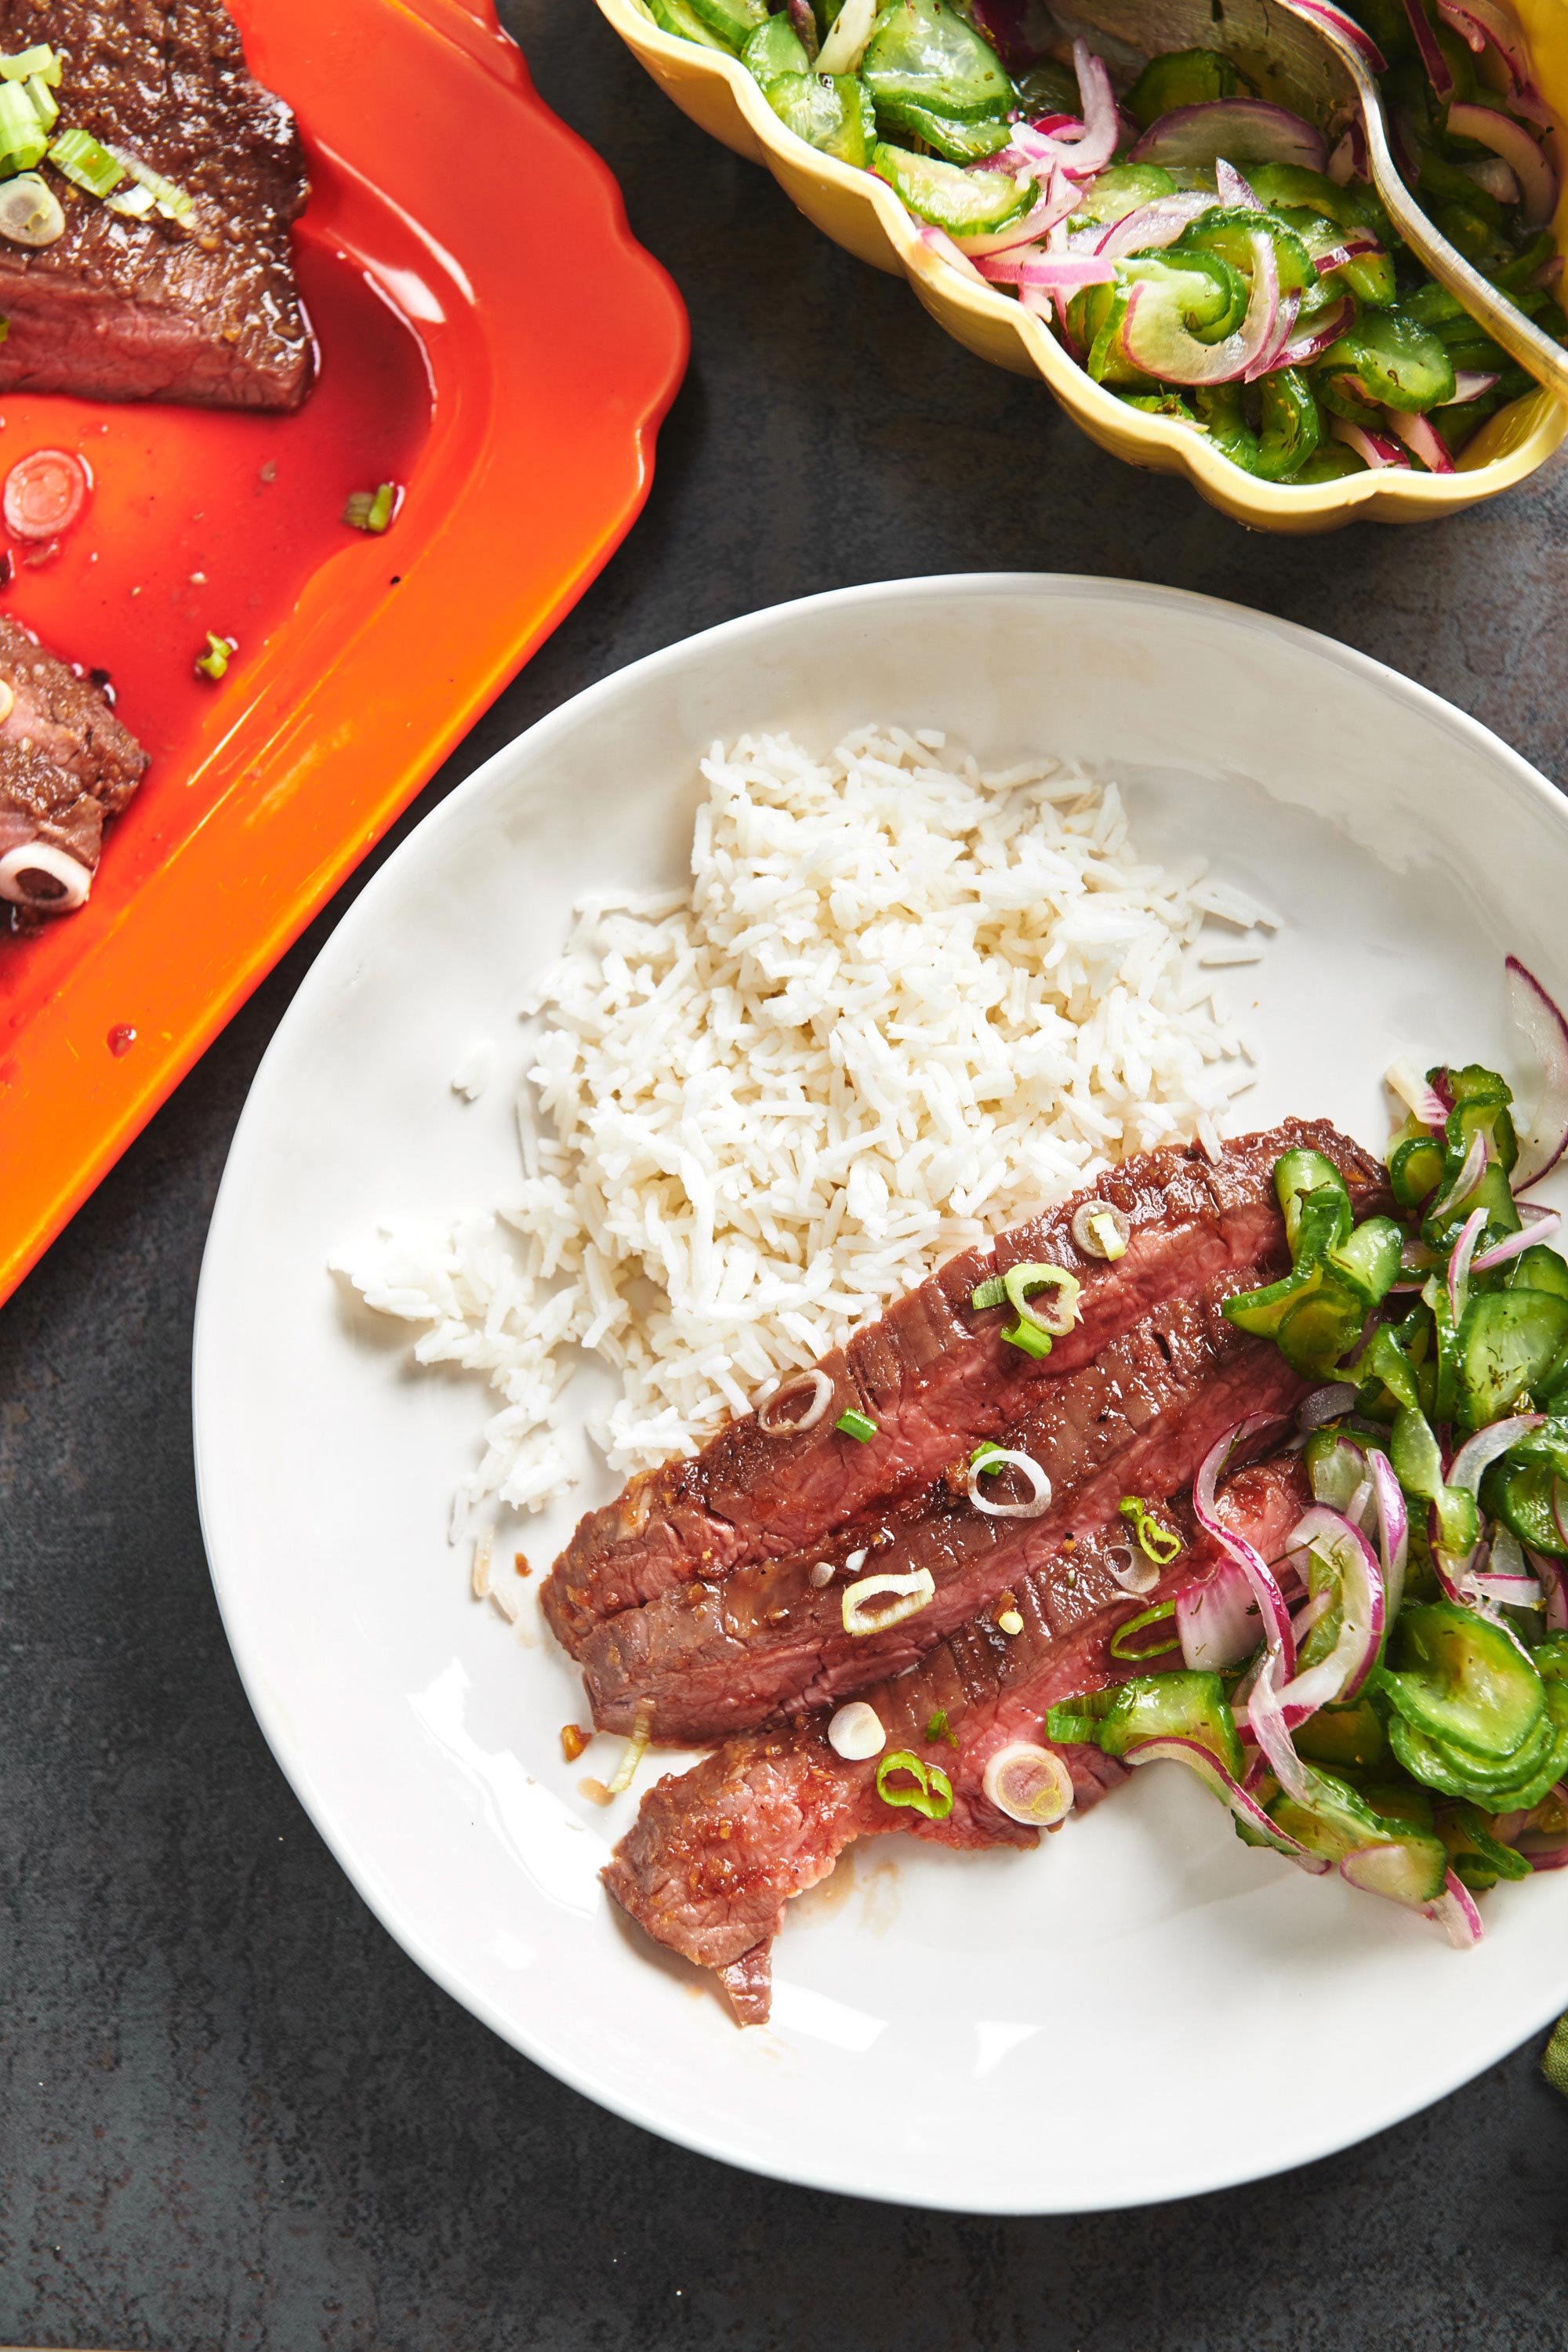 Slices of Soy-Ginger Flank Steak on a plate with rice and salad.